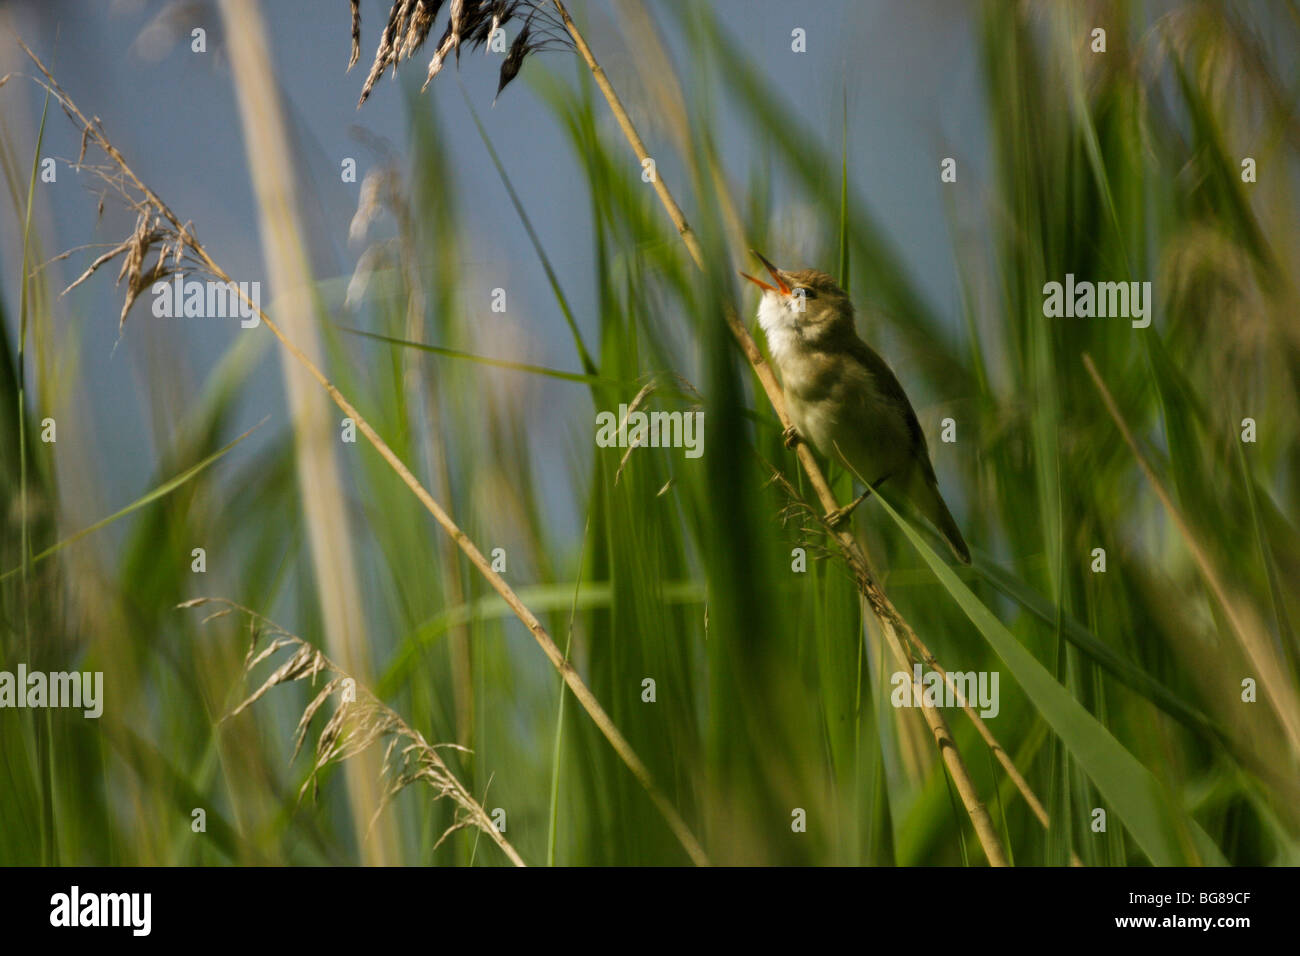 REED WARBLER, Acrocephalus scirpaceus, singing in a reedbed Stock Photo